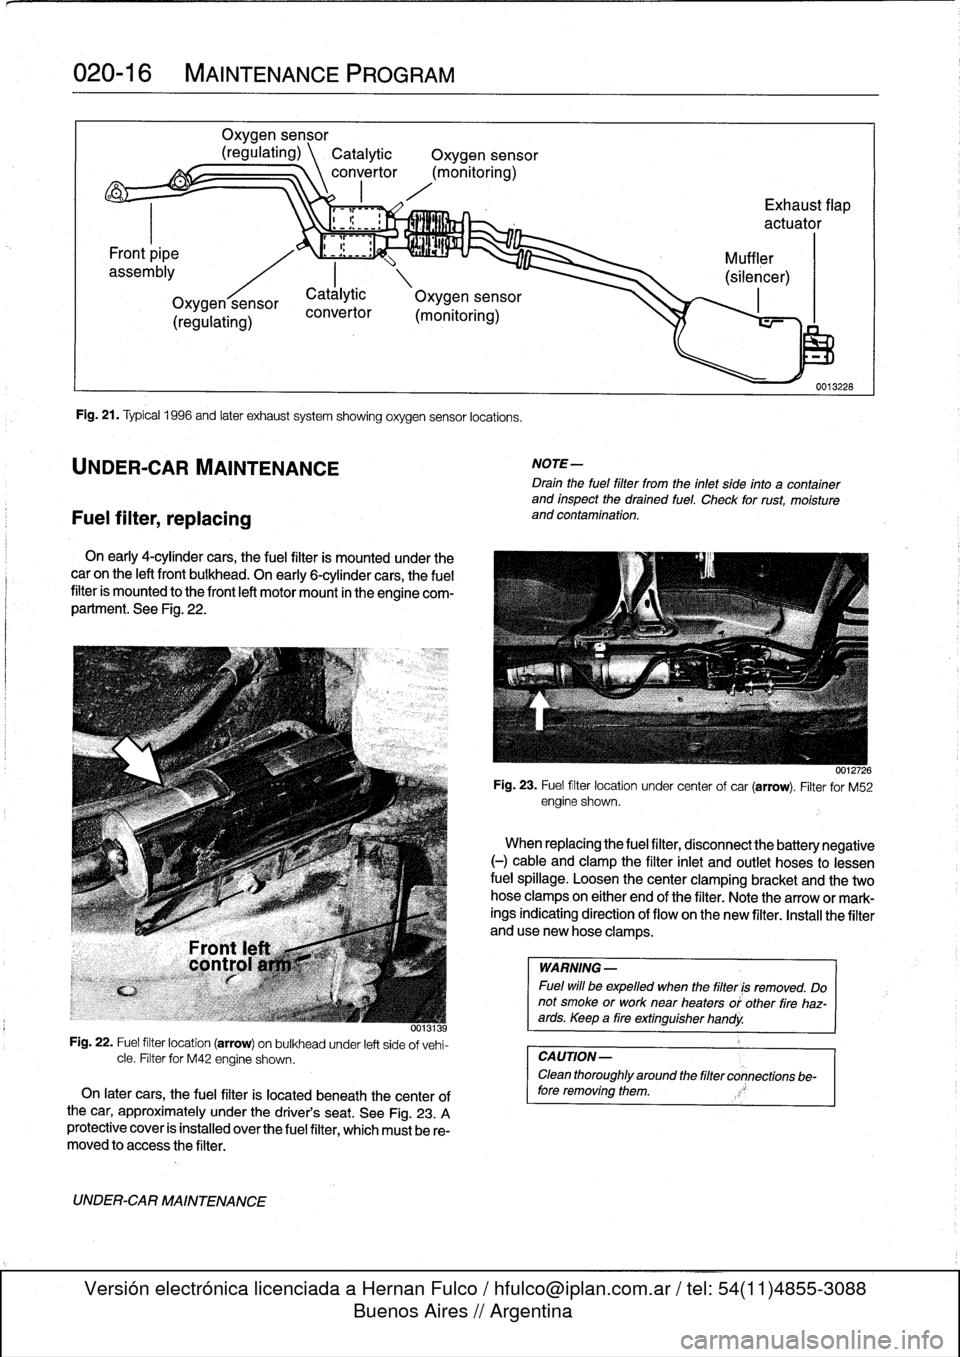 BMW M3 1996 E36 Workshop Manual 
020-
1
6

	

MAINTENANCE
PROGRAM

Fuel
filter,
replacing

Oxygen
sensor

(regulating)
\
Catalytic

	

Oxygen
sensor
convertor
(monitoring)

Fig
.
21
.
Typical
1996
and
later
exhaust
system
showing
ox